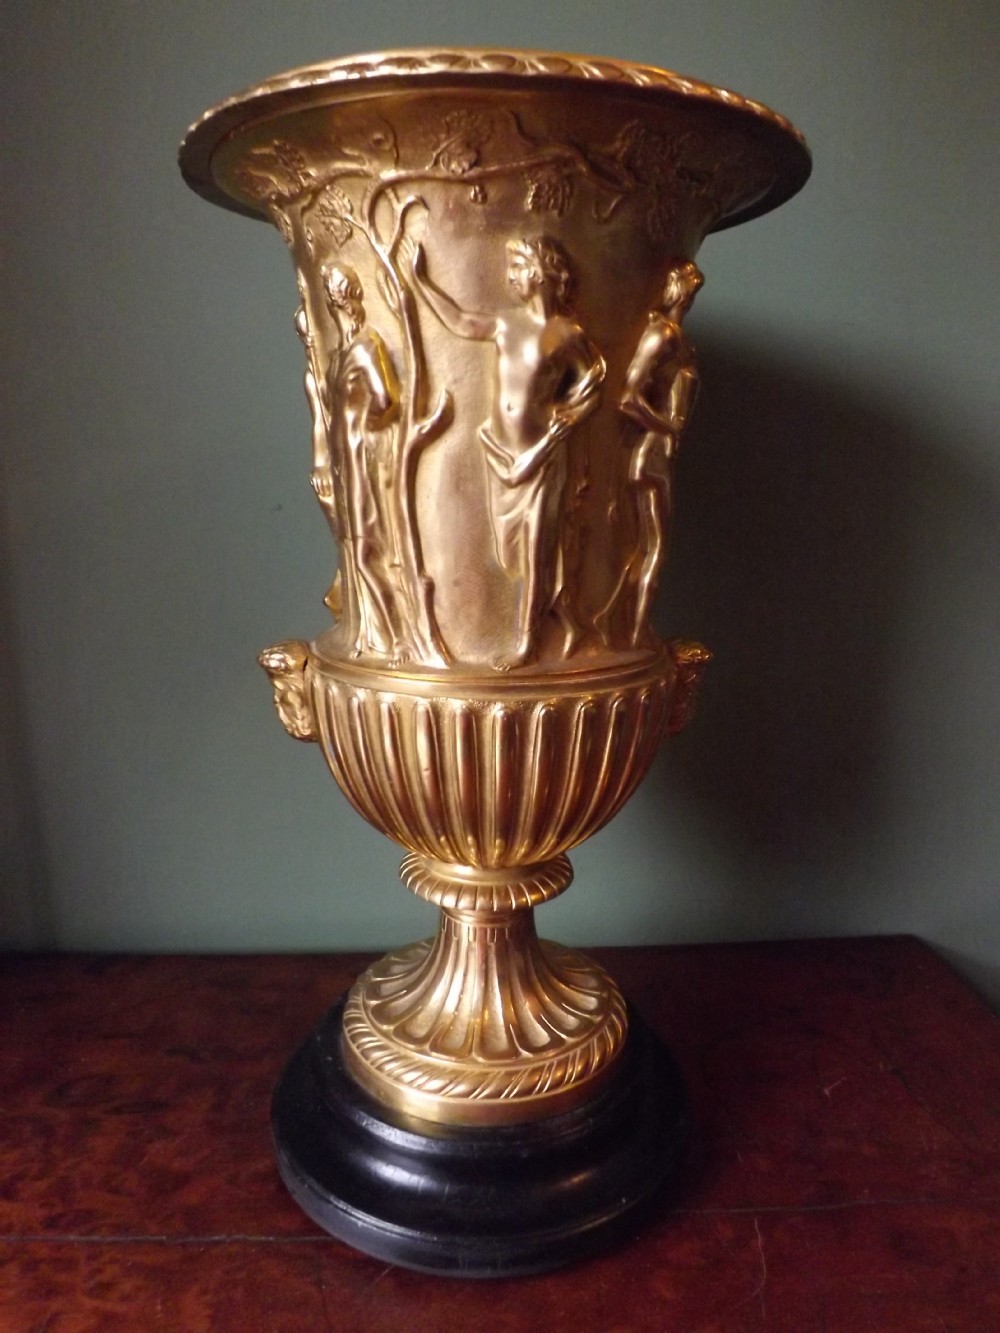 late c19th french ormolu bronze copy of the classical ancient greek gaeta vase after the antique